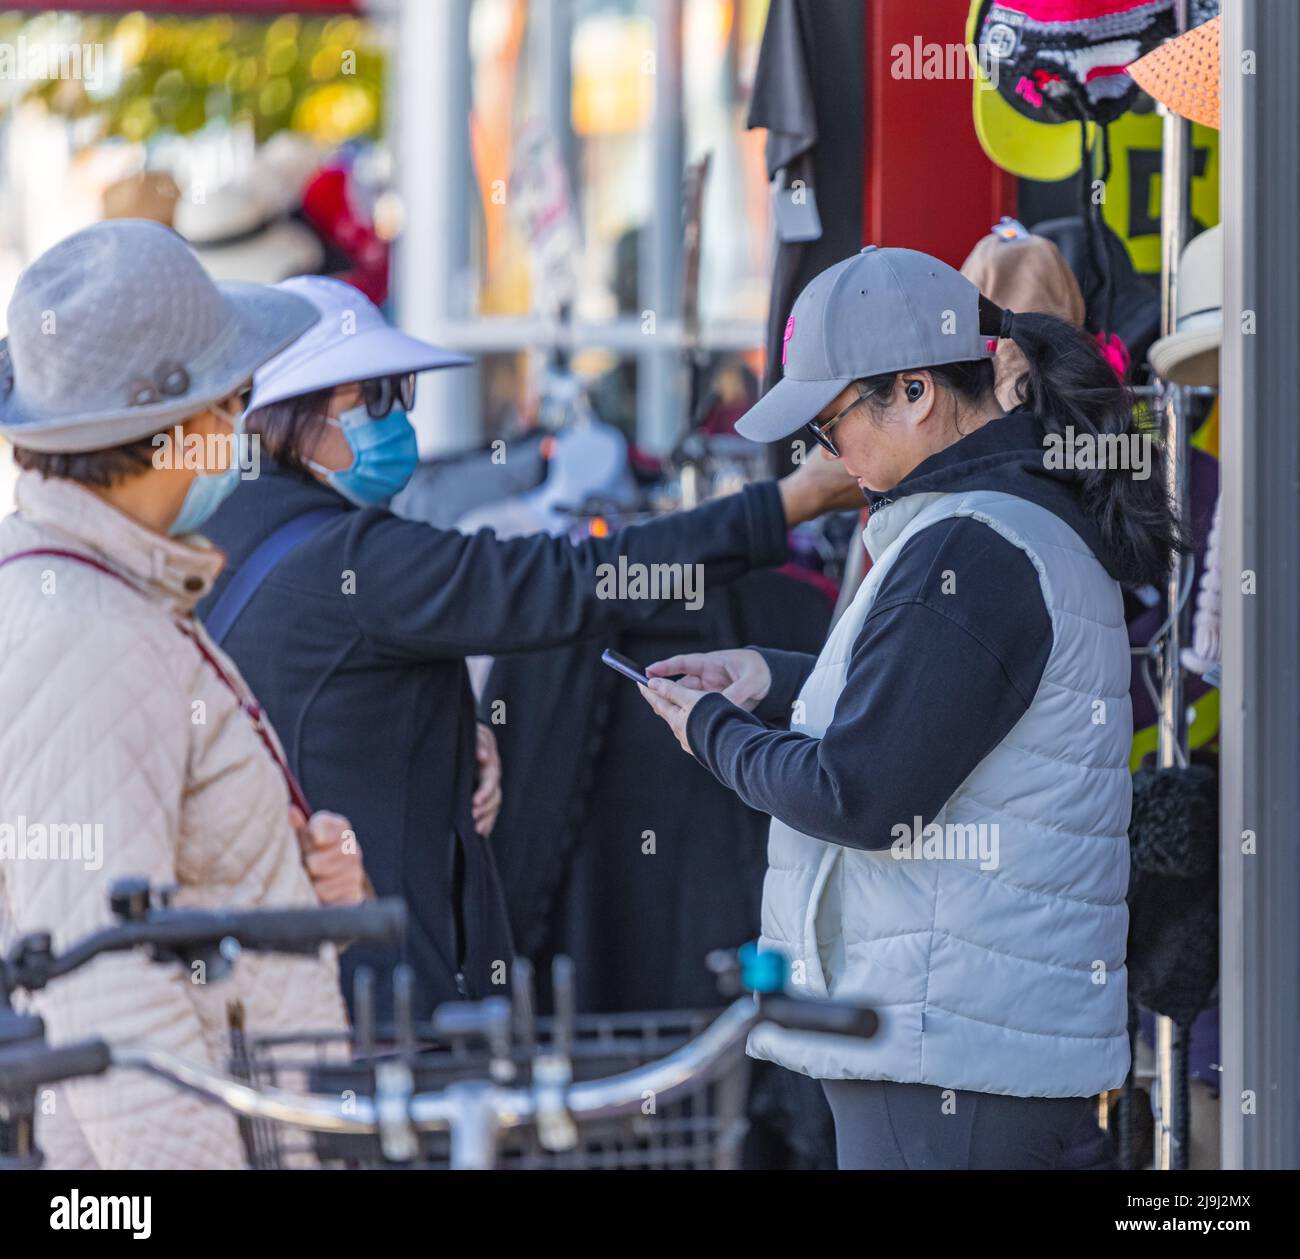 Women are browsing a rail of clothes at a street market. Customers looking and choosing clothes,gifts in the street markets. Travel photo, street view Stock Photo